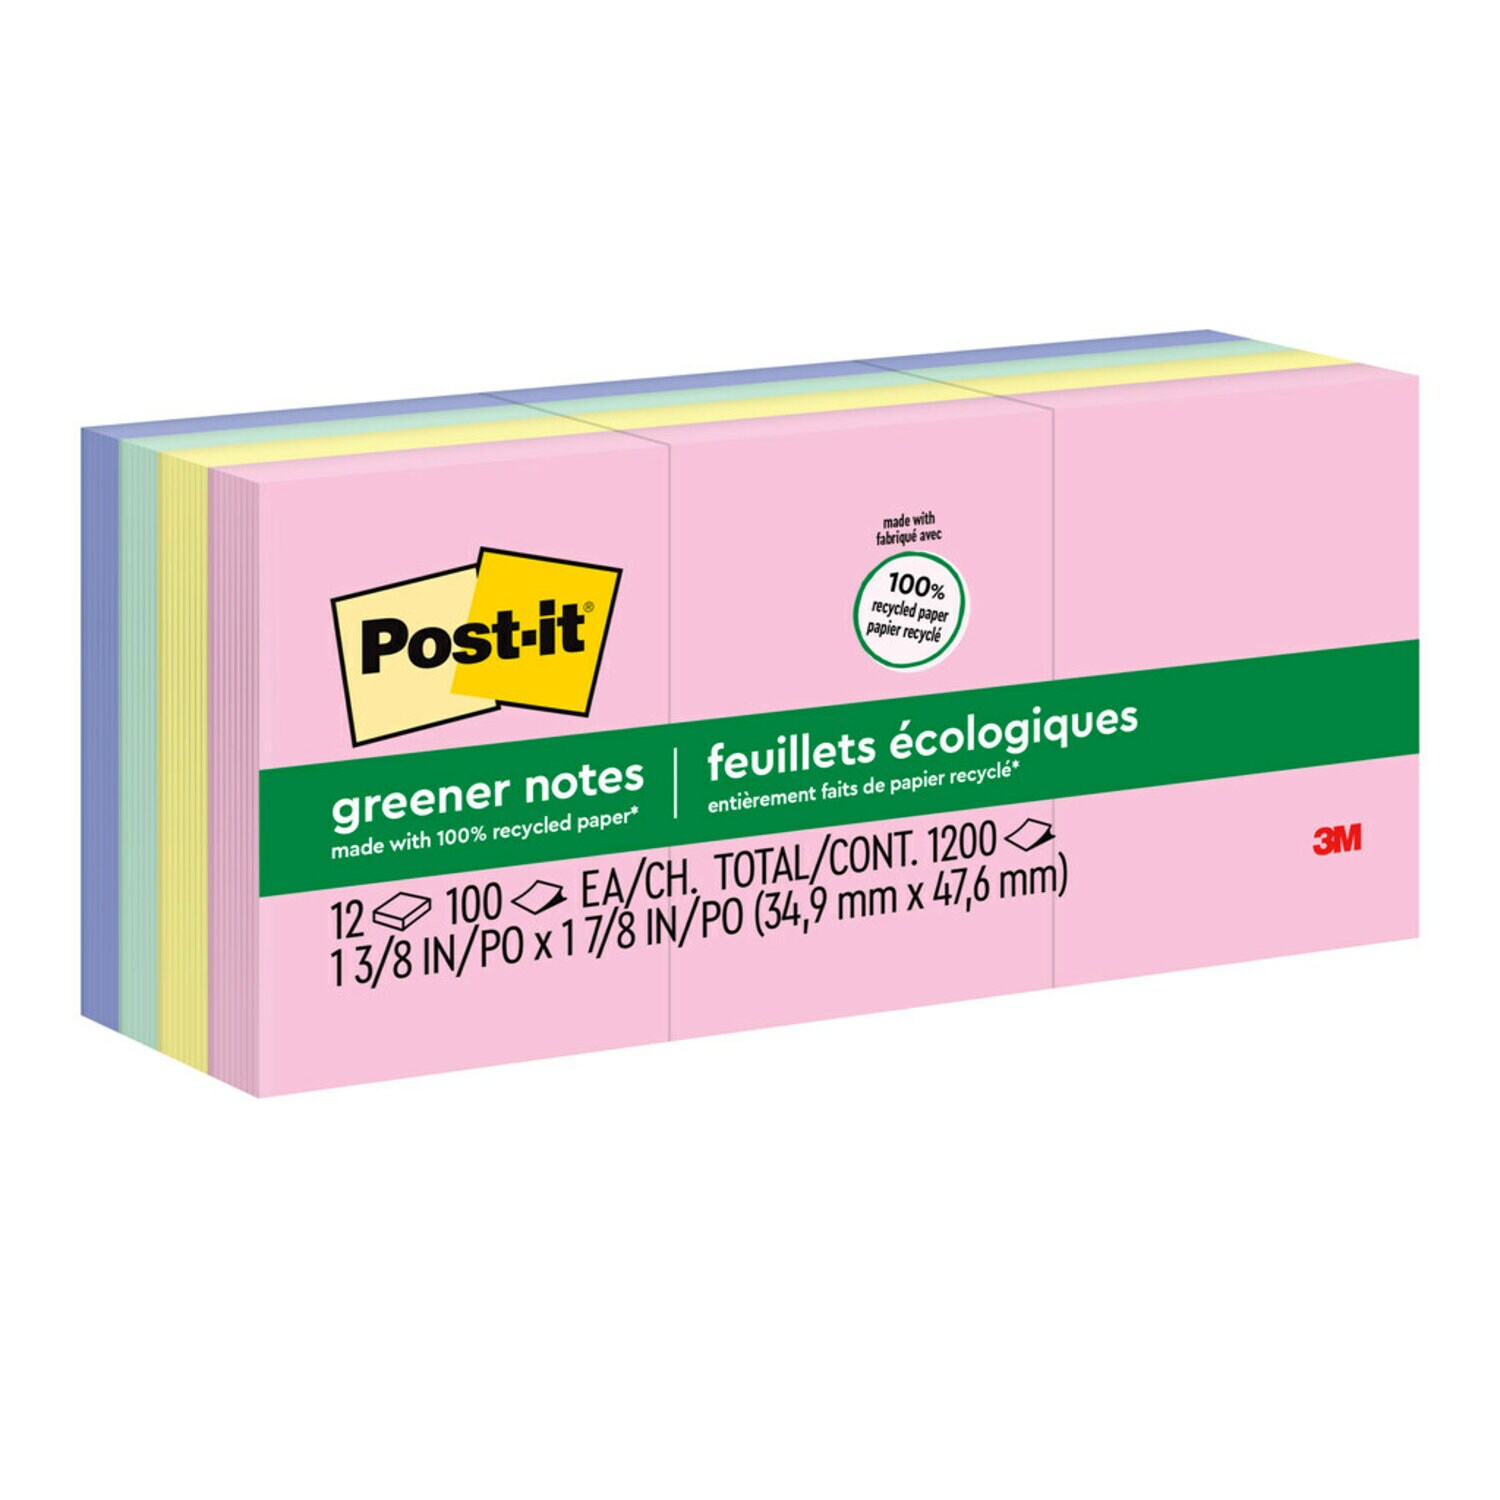 7100169981 - Post-it Greener Notes 653-RP-A, 1-3/8 in x 1-7/8 in (34,9 mm x 47,6 mm)
Helsinki Colors